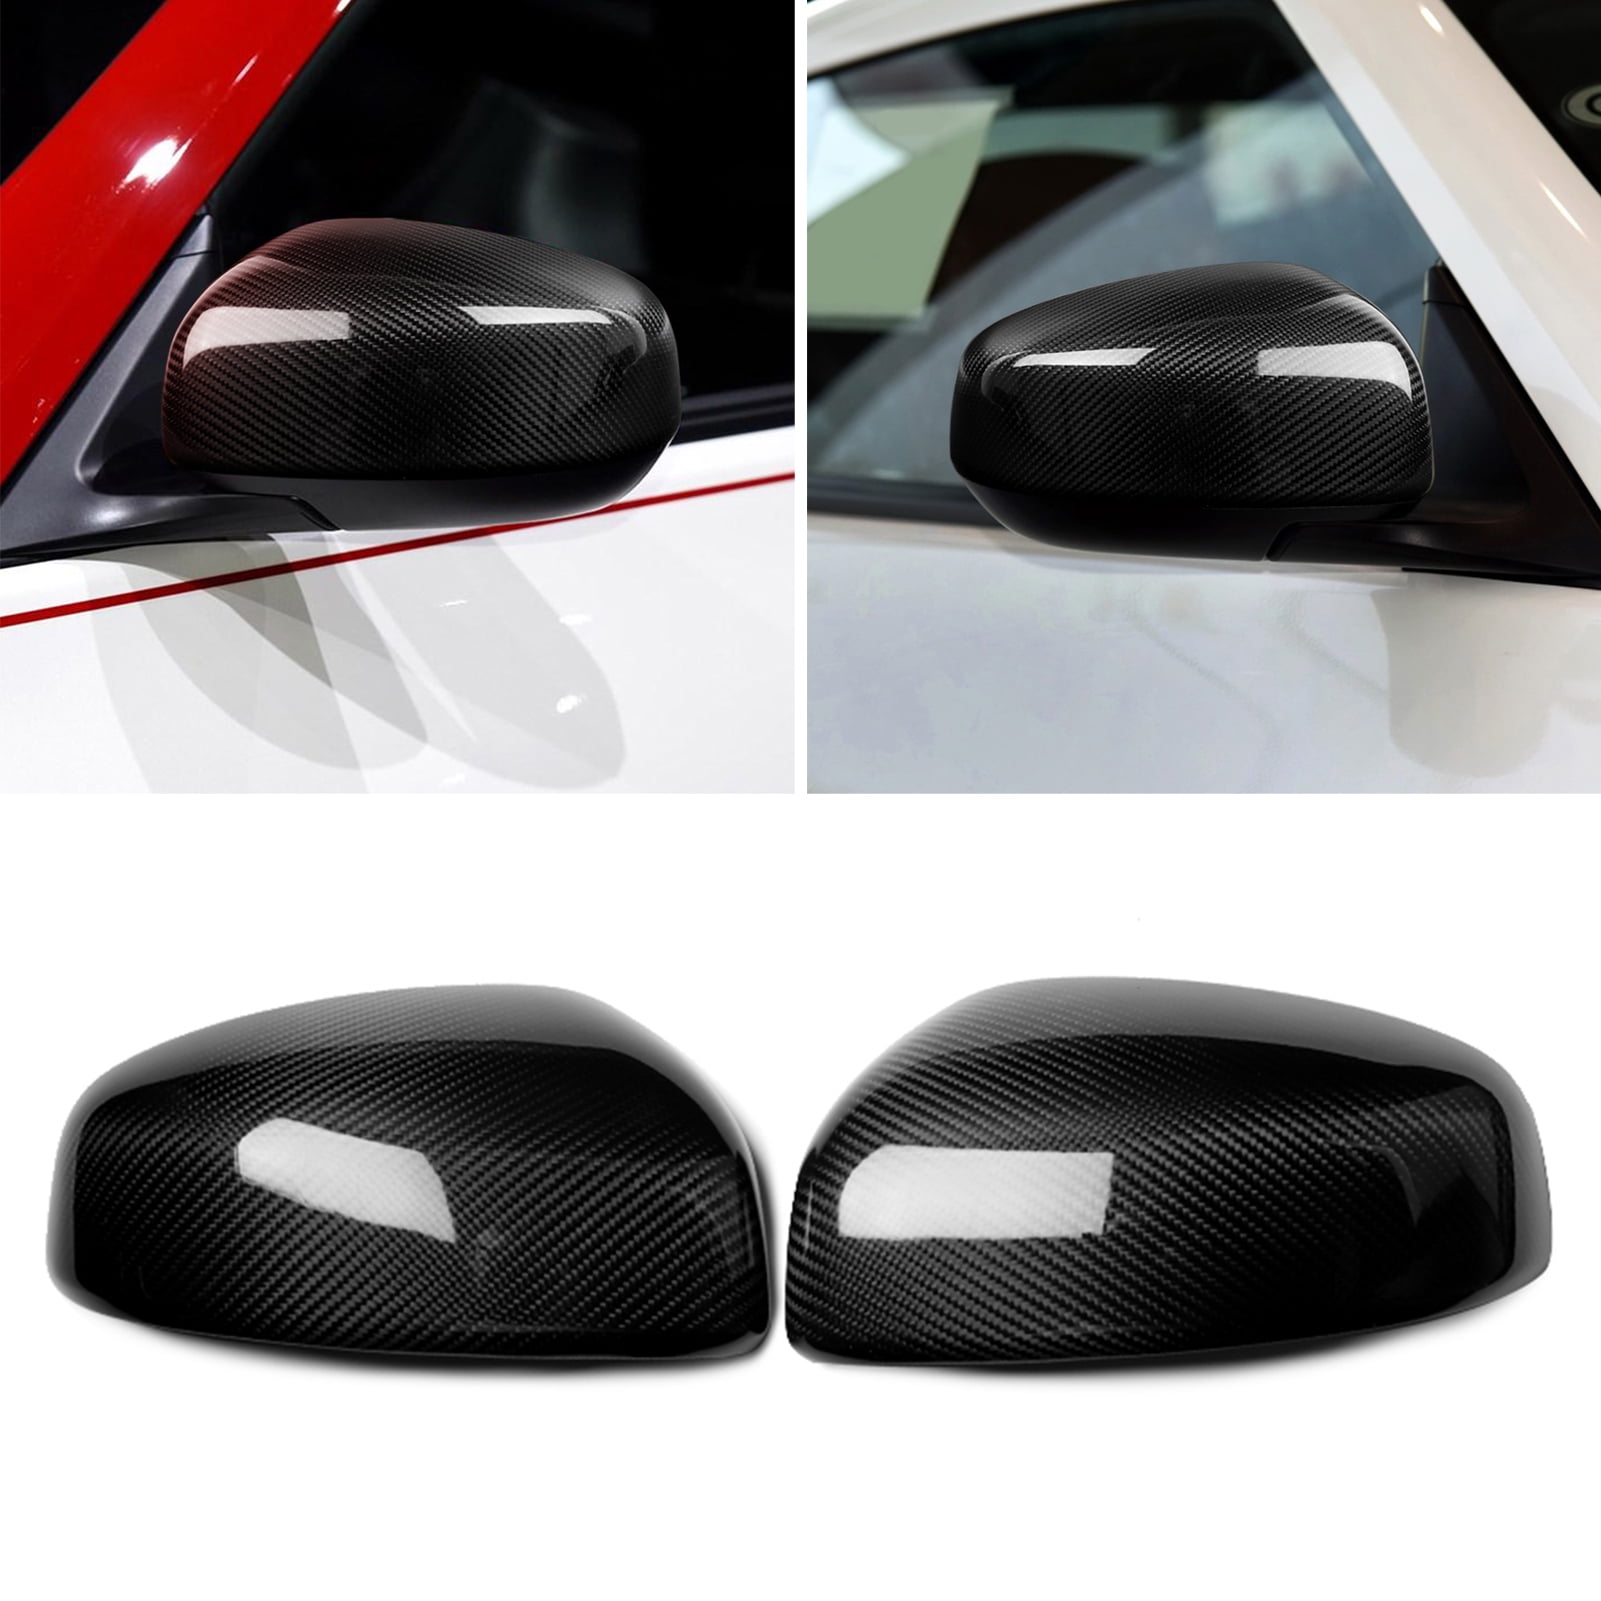 Carbon fiber style Rear view mirror cover for Nissan Altima 2013-2016 2017 2018